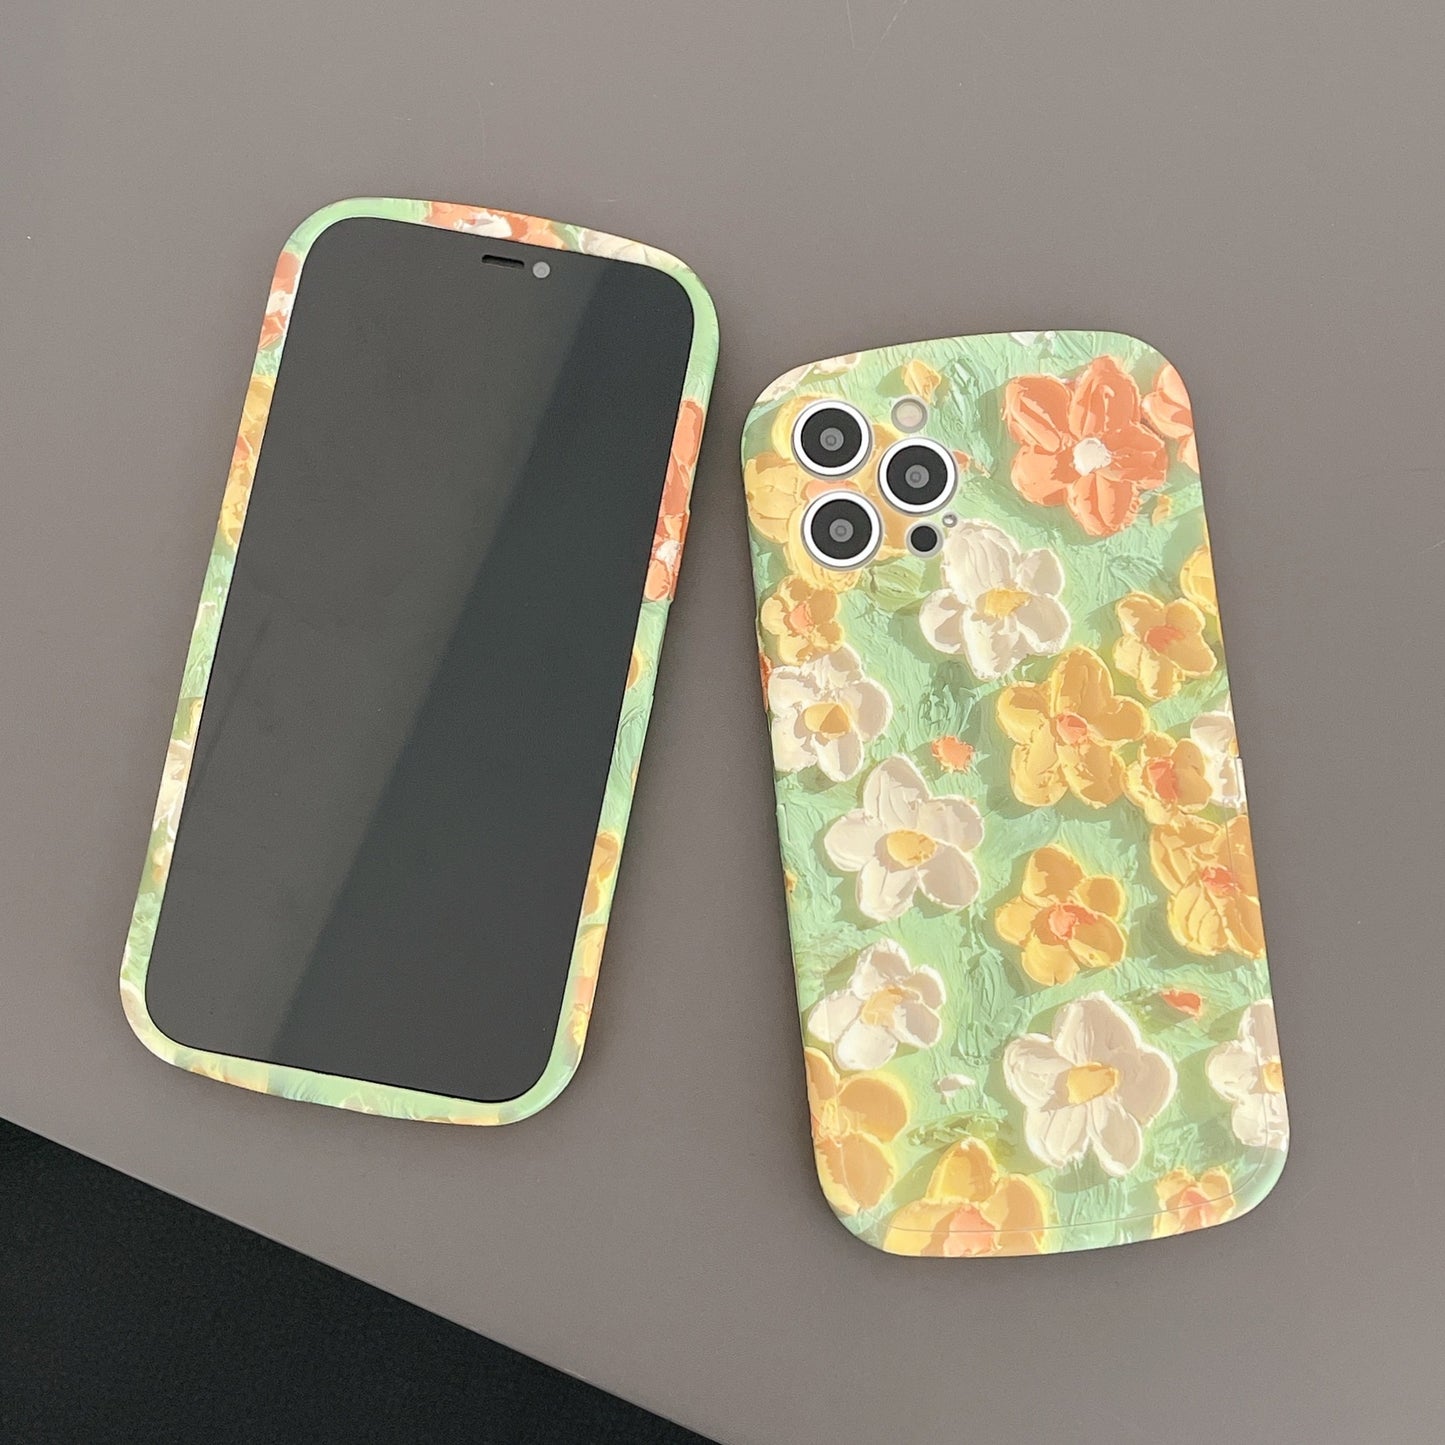 3D Painting Look iPhone Protective Cover with Stand